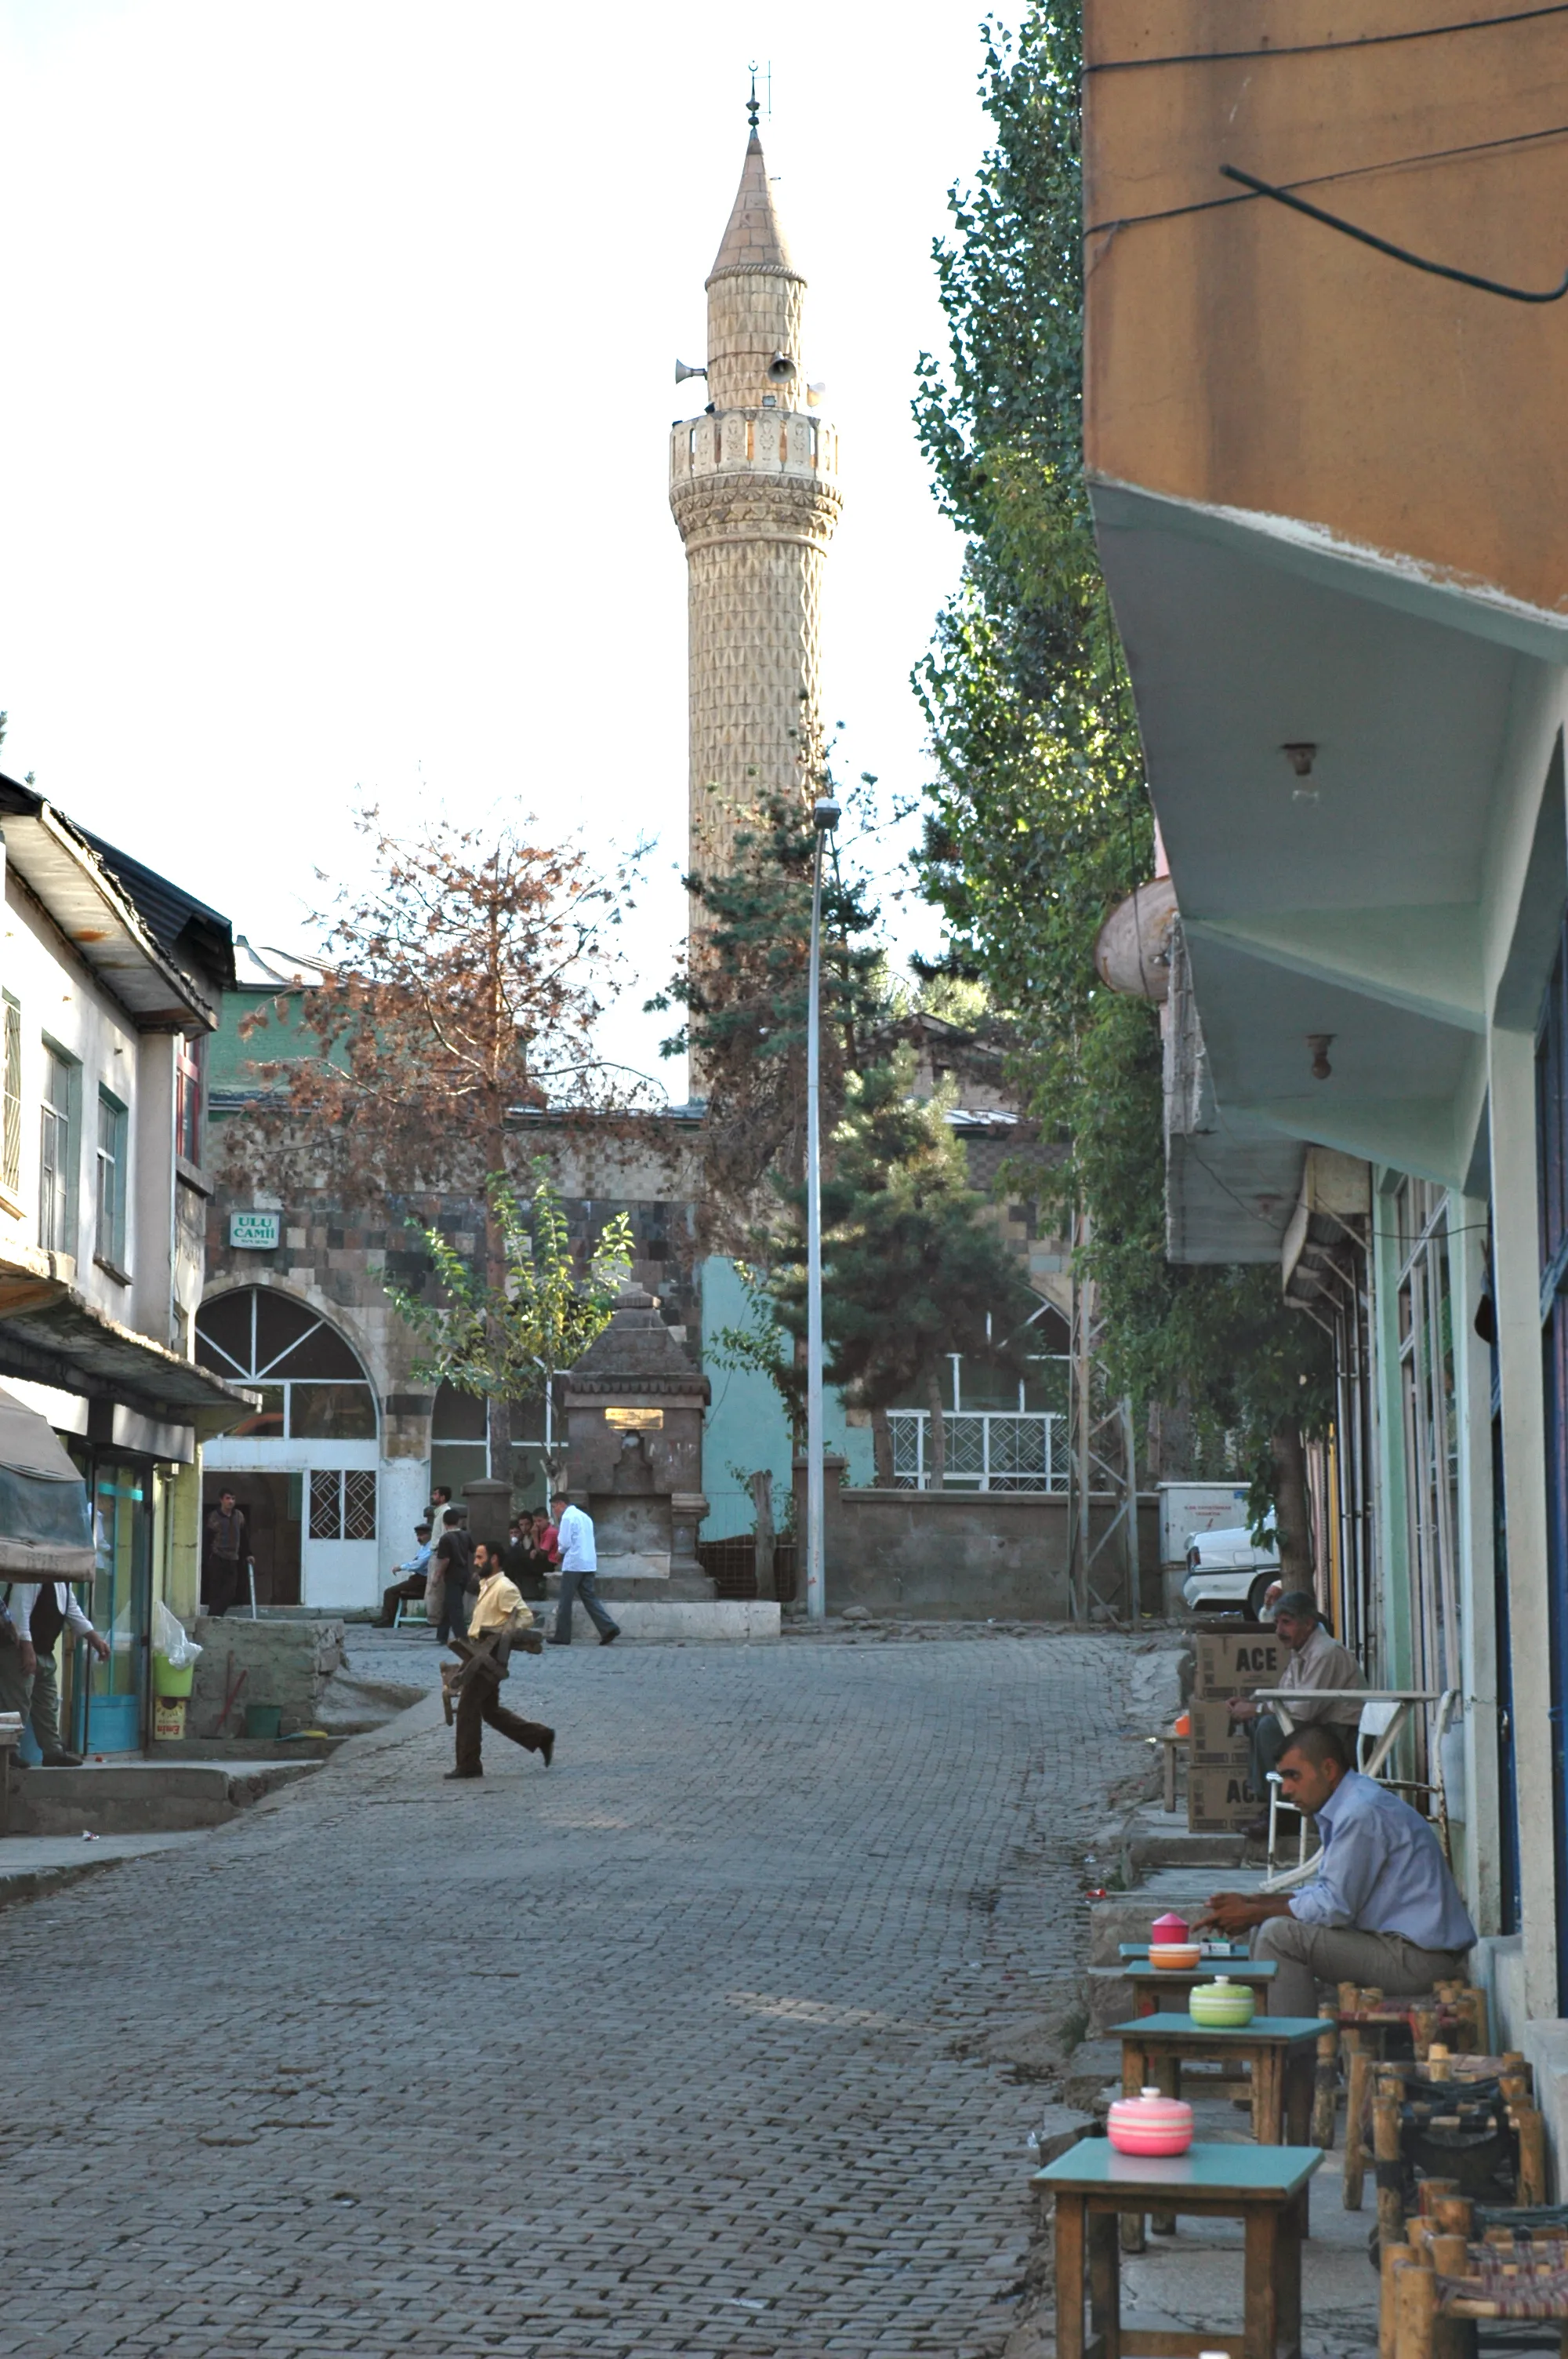 Photo showing: From street views I think the road is no longer cobbled, but the general impression seems not to have changed too much from this older picture. Approaching Ulu Cami (Great Mosque).